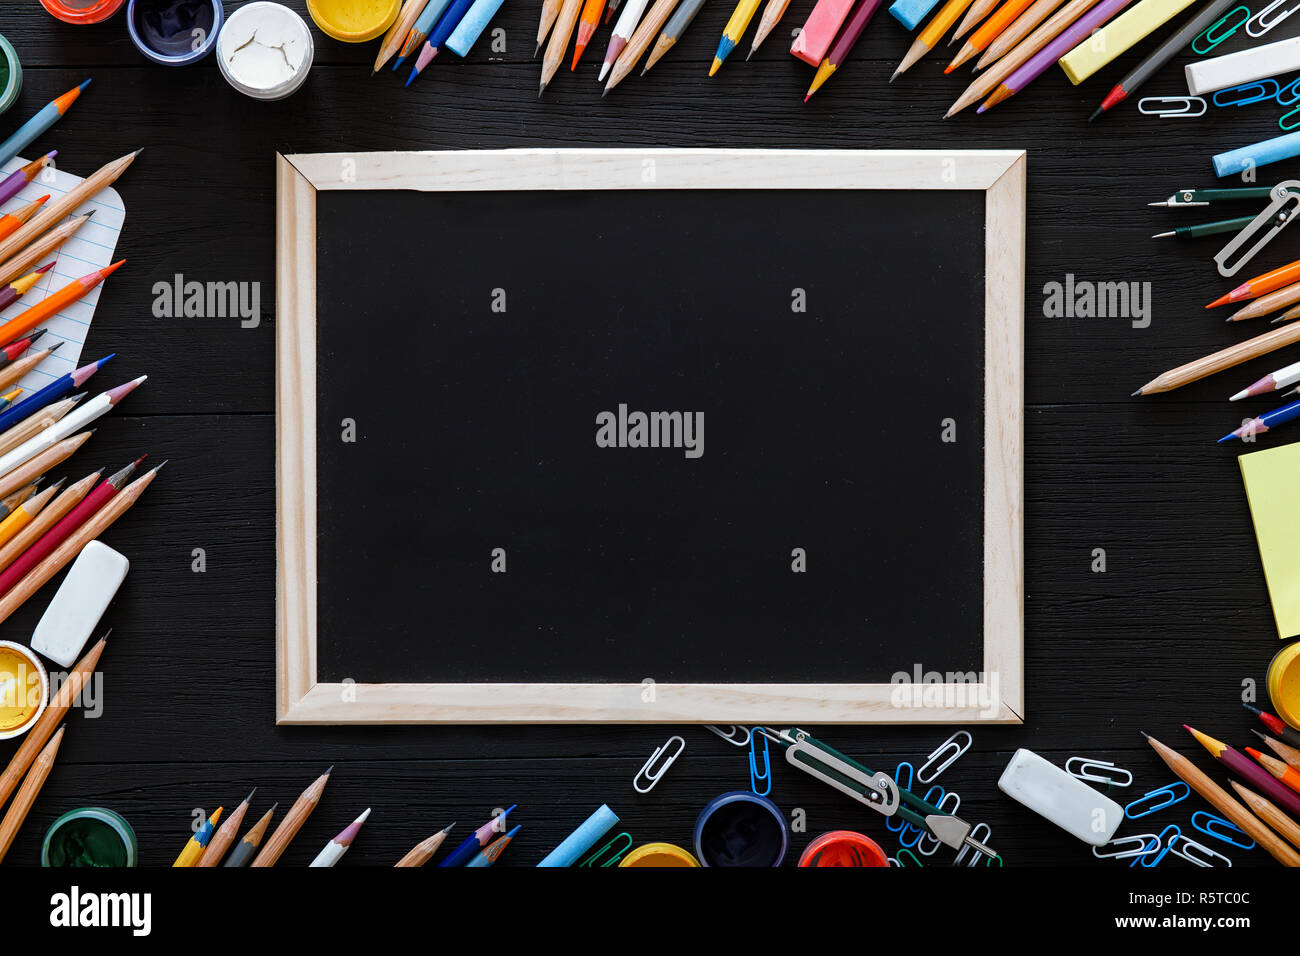 Welcome Back To School Background With Kids Supplies For Modern Primary Education Color Pencils Paints And Frame On Dark Black Wooden Pupils Desk W Stock Photo Alamy